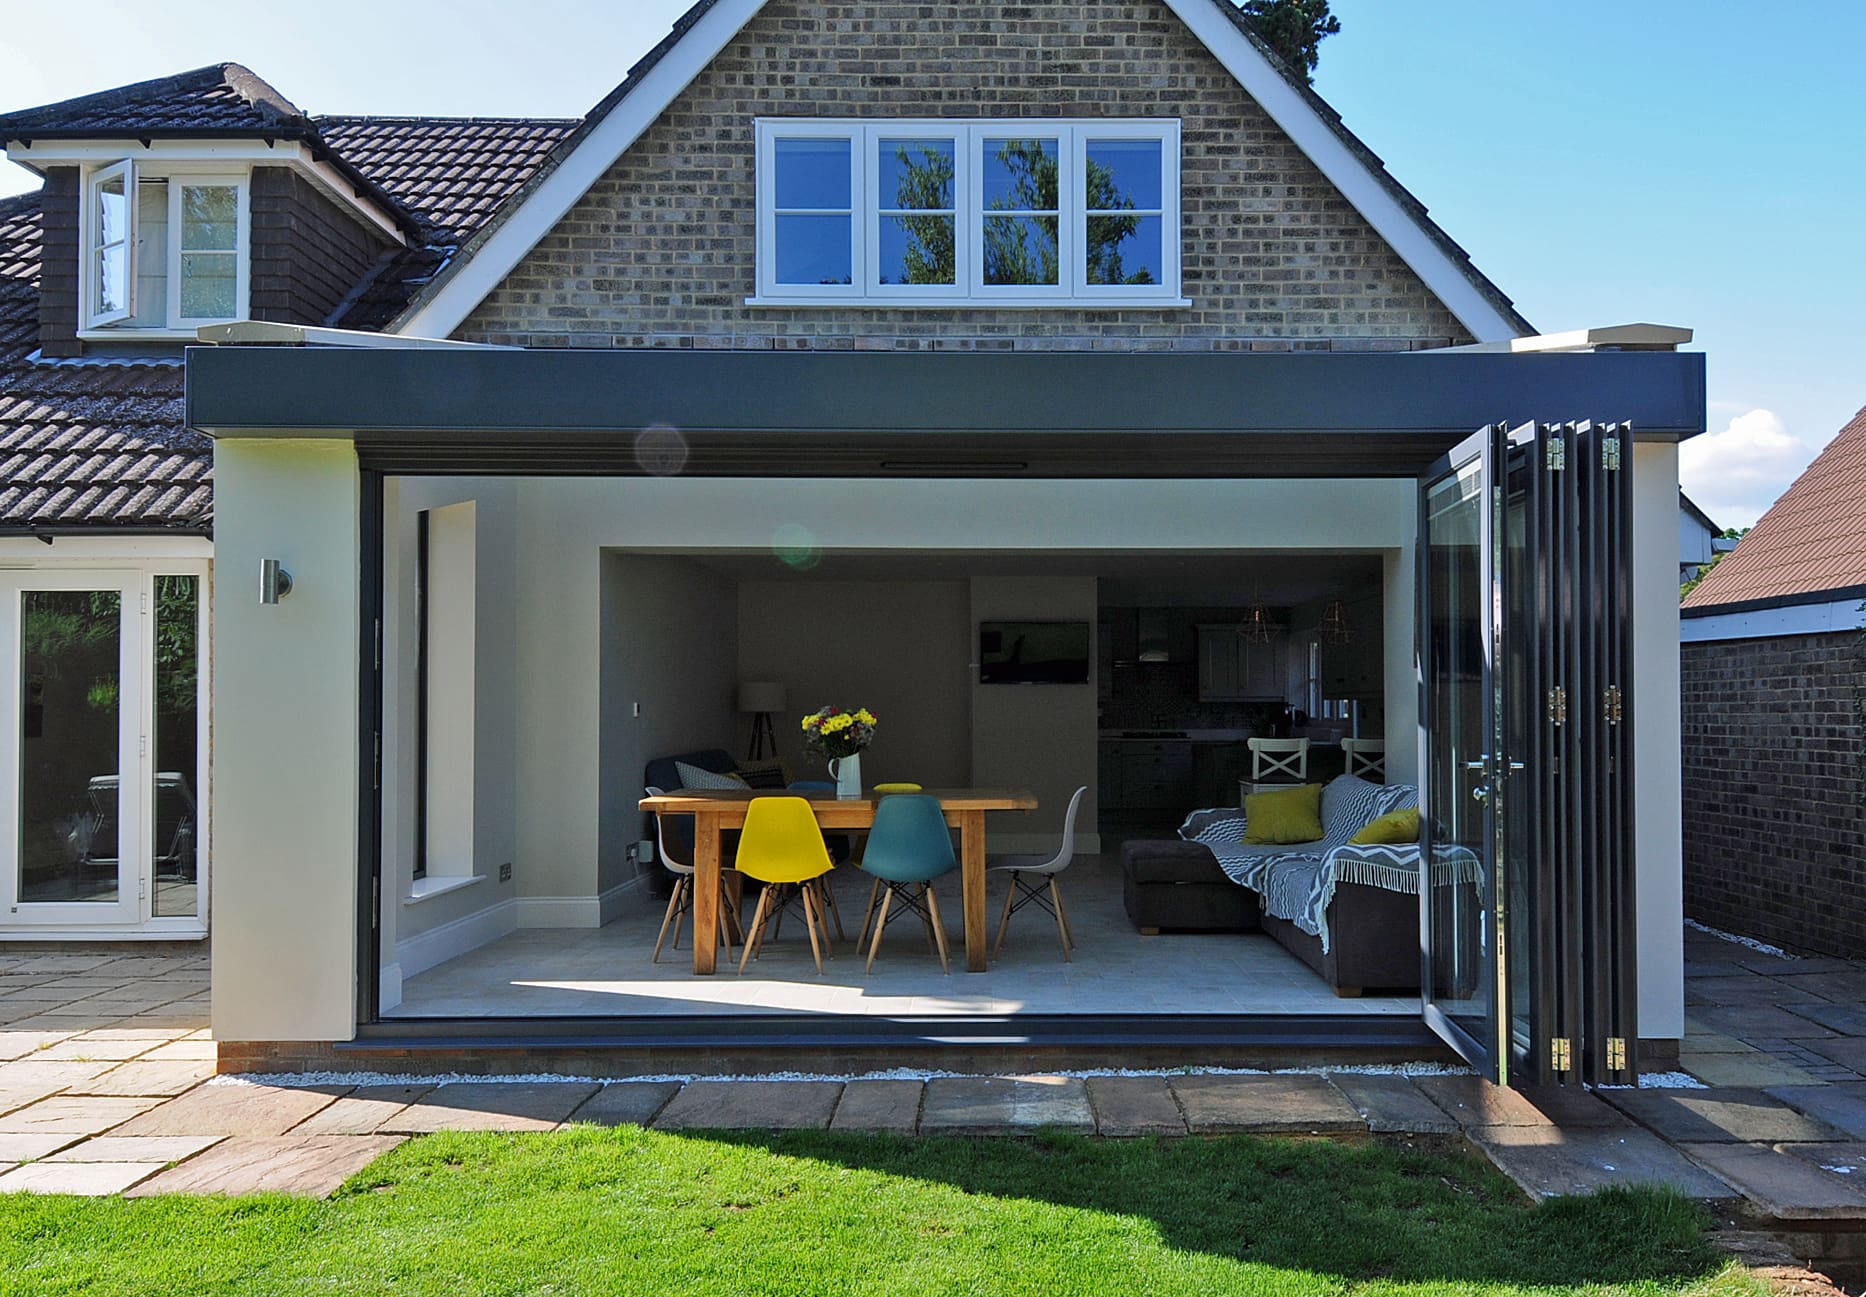 Modern home with dining area extension with bi-folding doors and roof light.